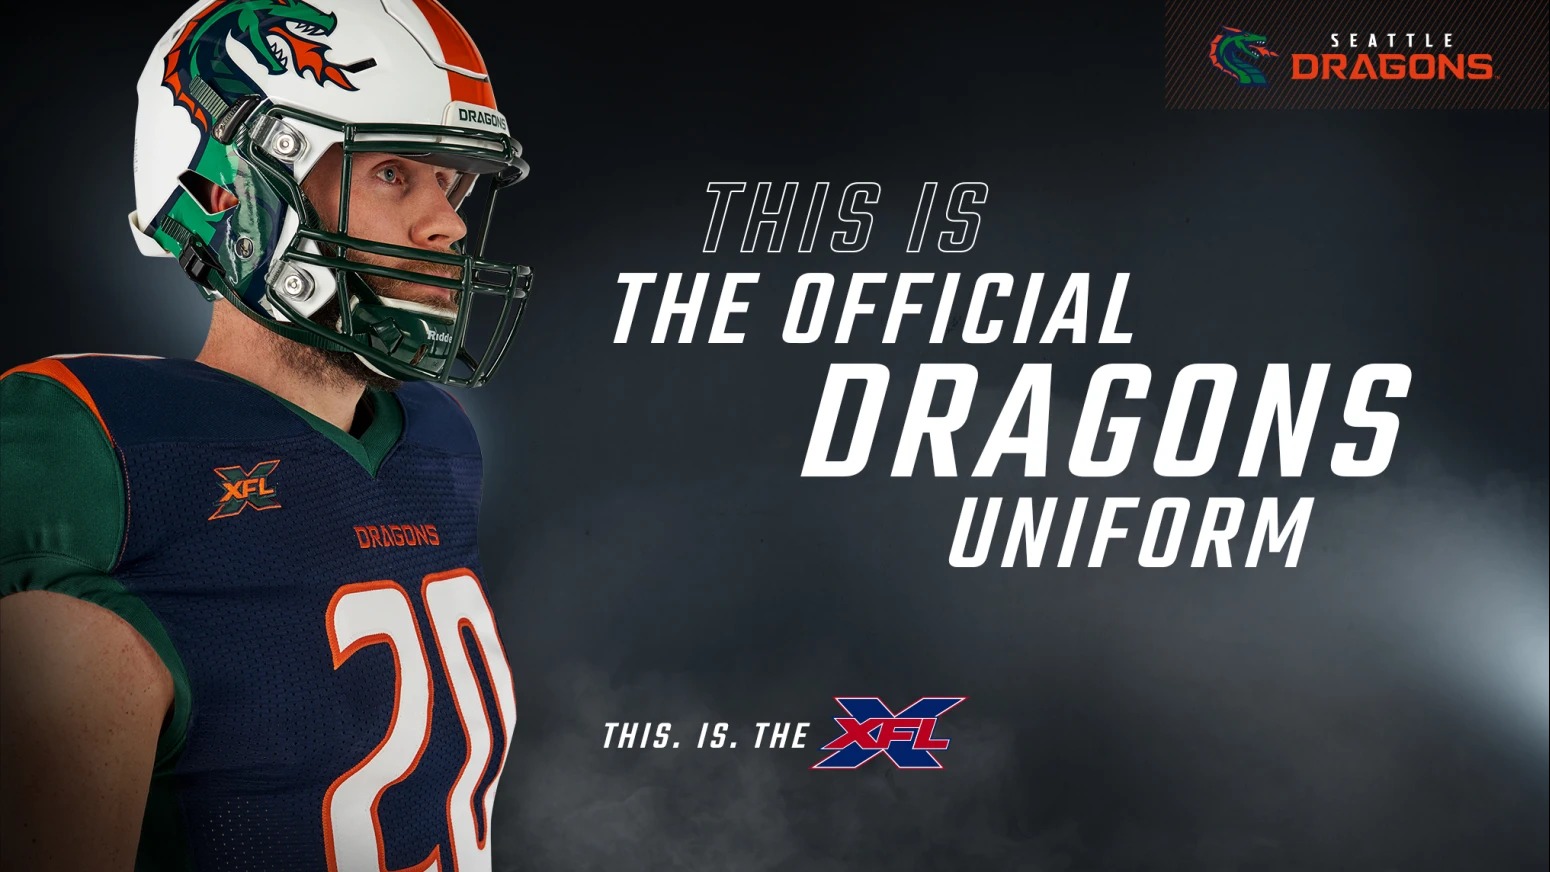 Seattle Dragons unveil XFL uniforms, which get thumbs up from two